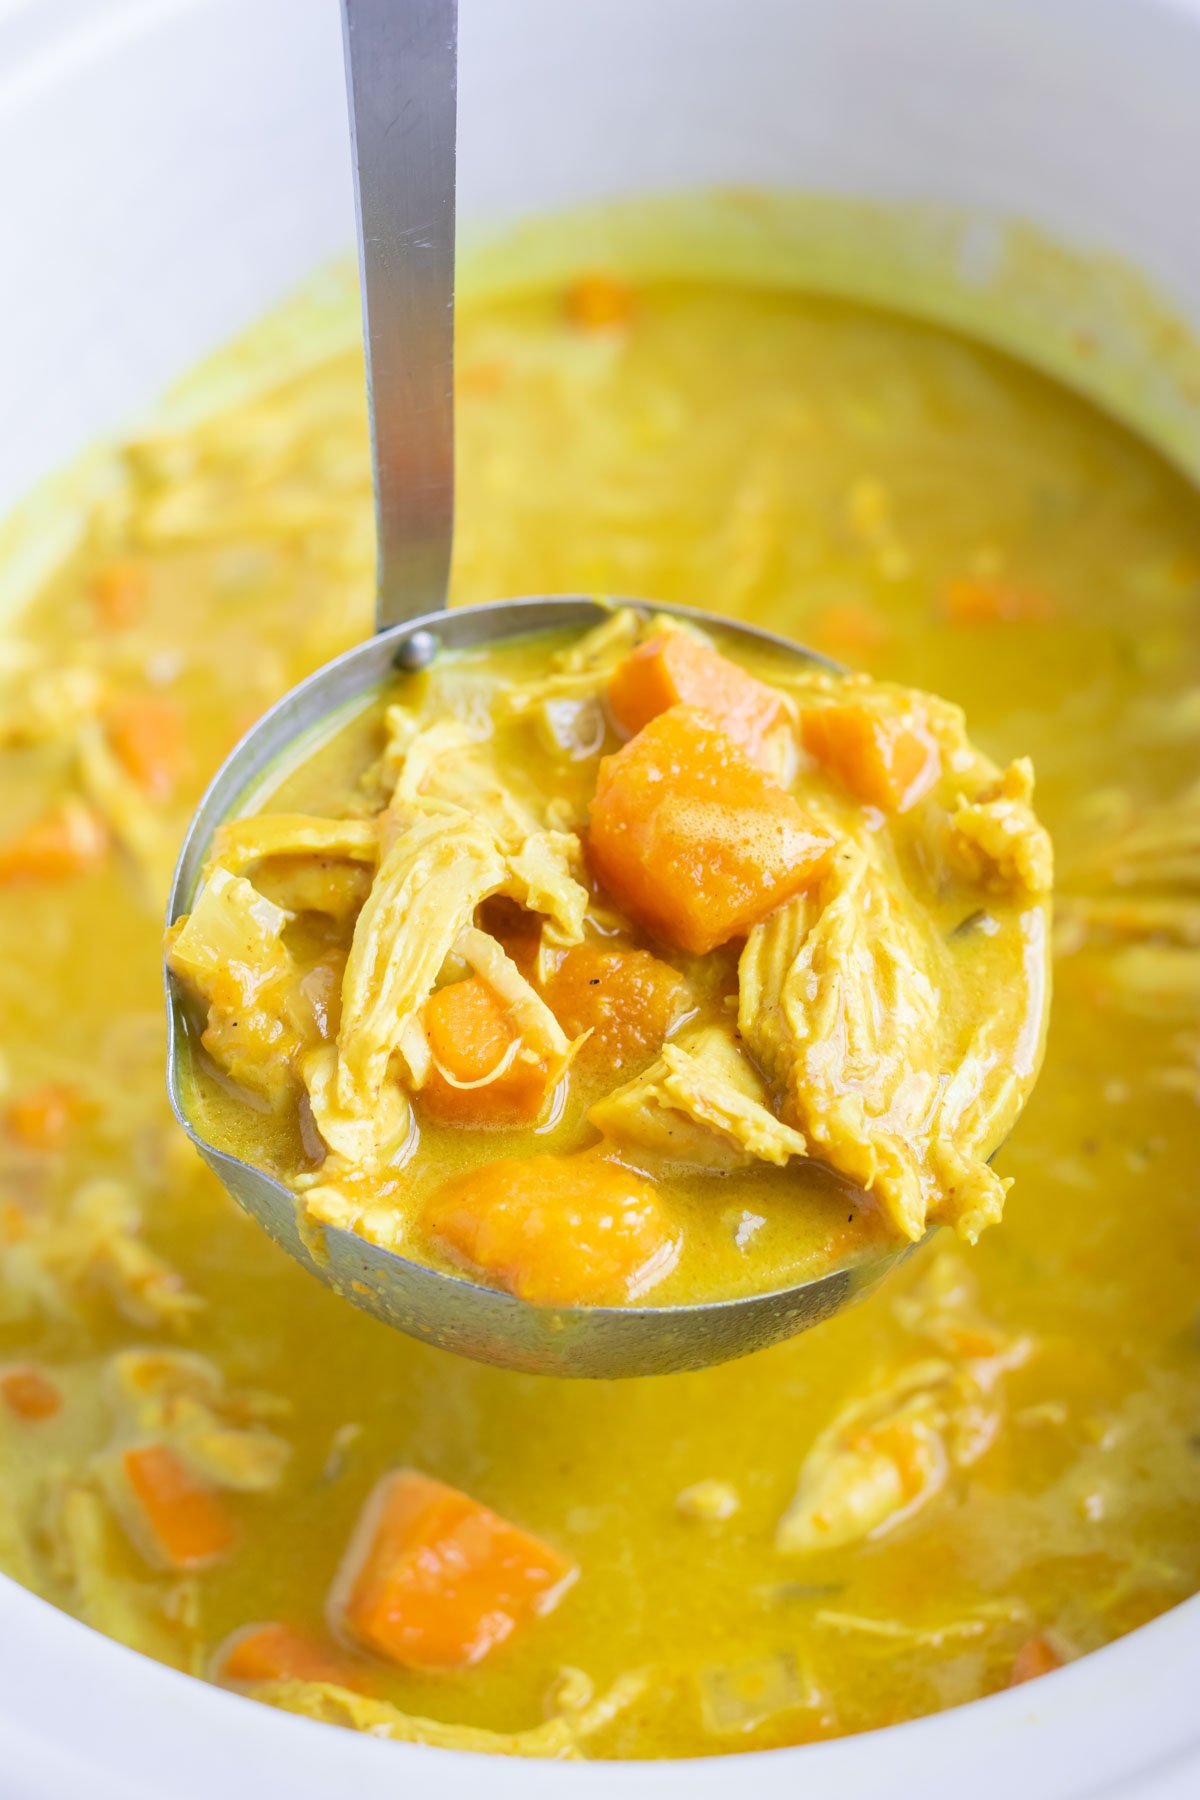 A ladle scoops out a flavorful and healthy yellow chicken curry.